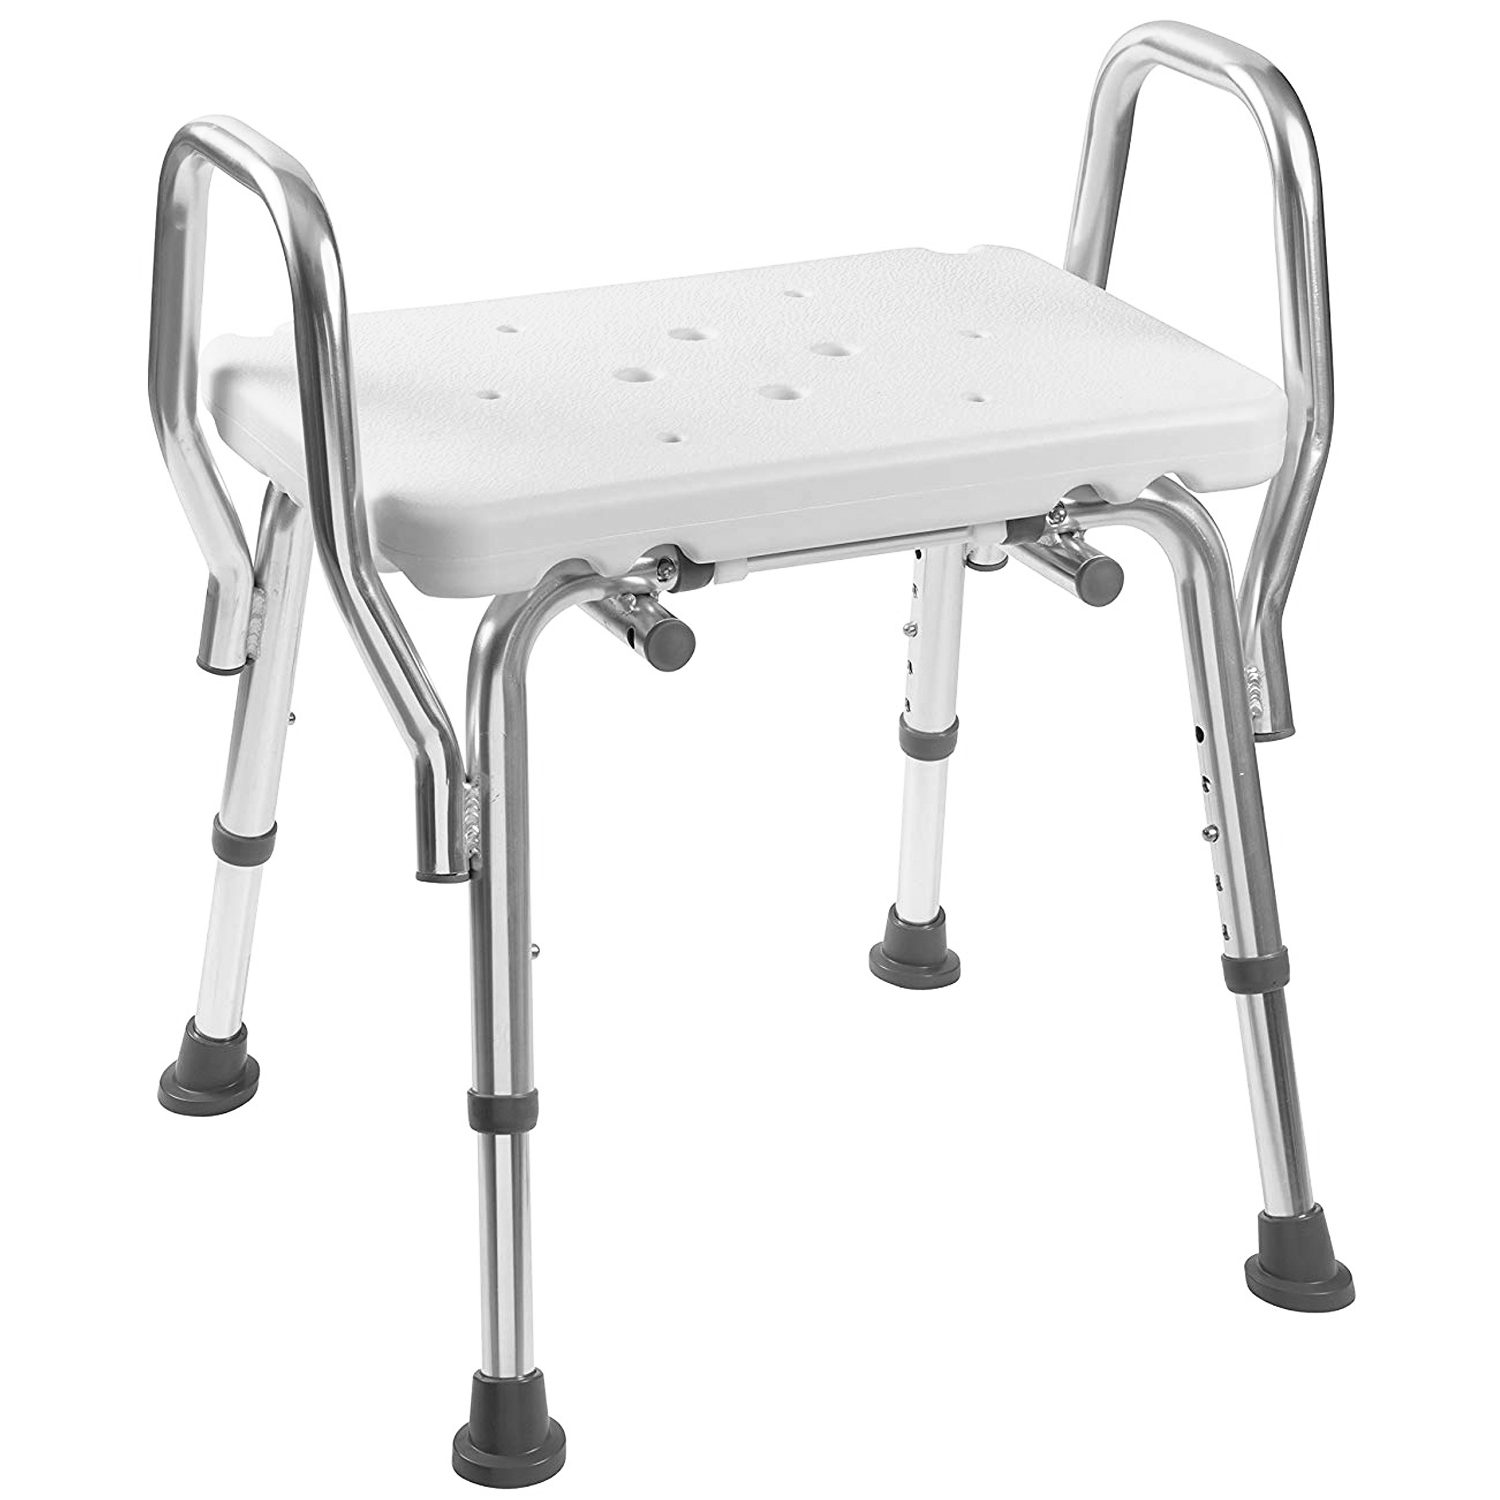 DMI Shower Chair, 16-20"H, 19 x 13 Seat, 350 lb Capacity - image 1 of 7